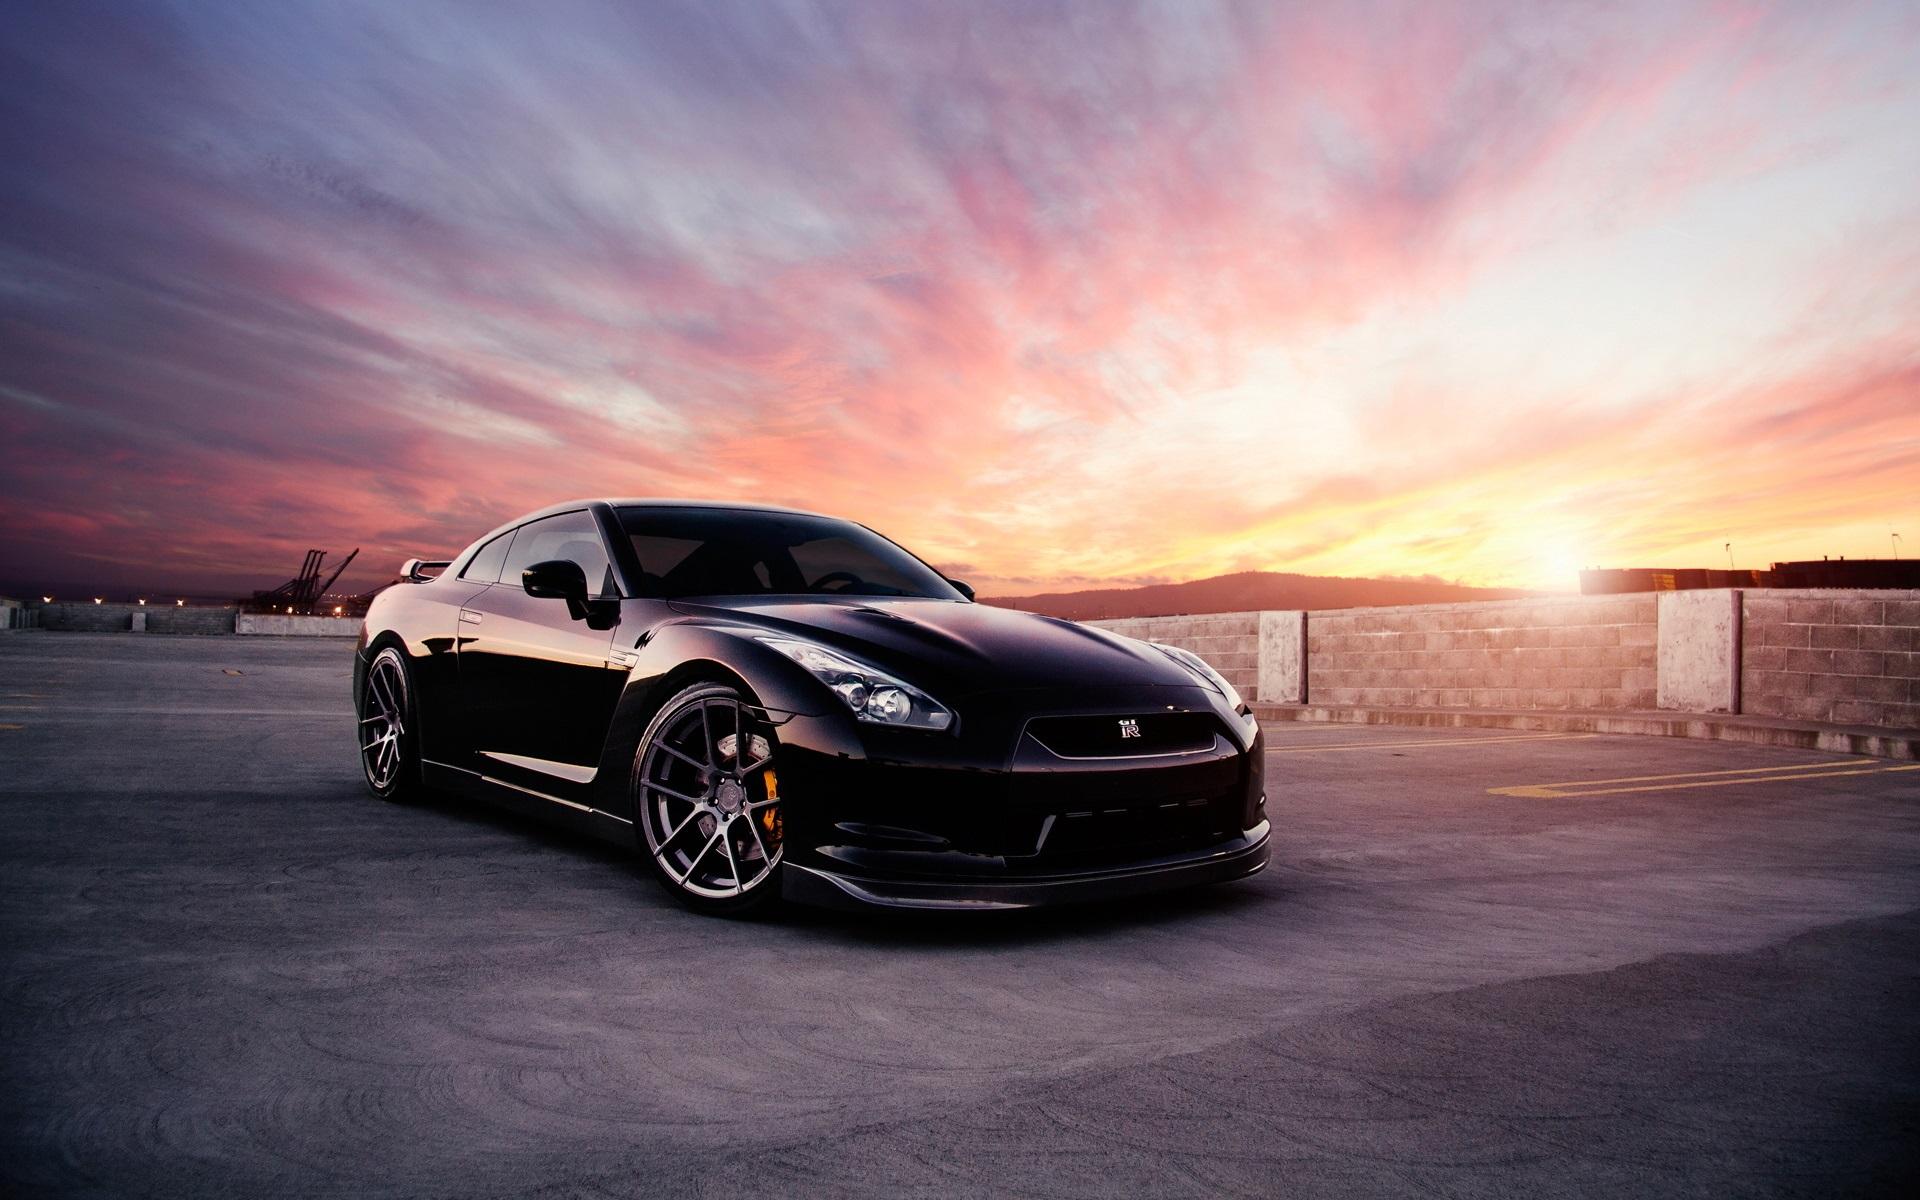 Wallpaper Nissan GT R Black Car At Sunset 1920x1200 HD Picture, Image